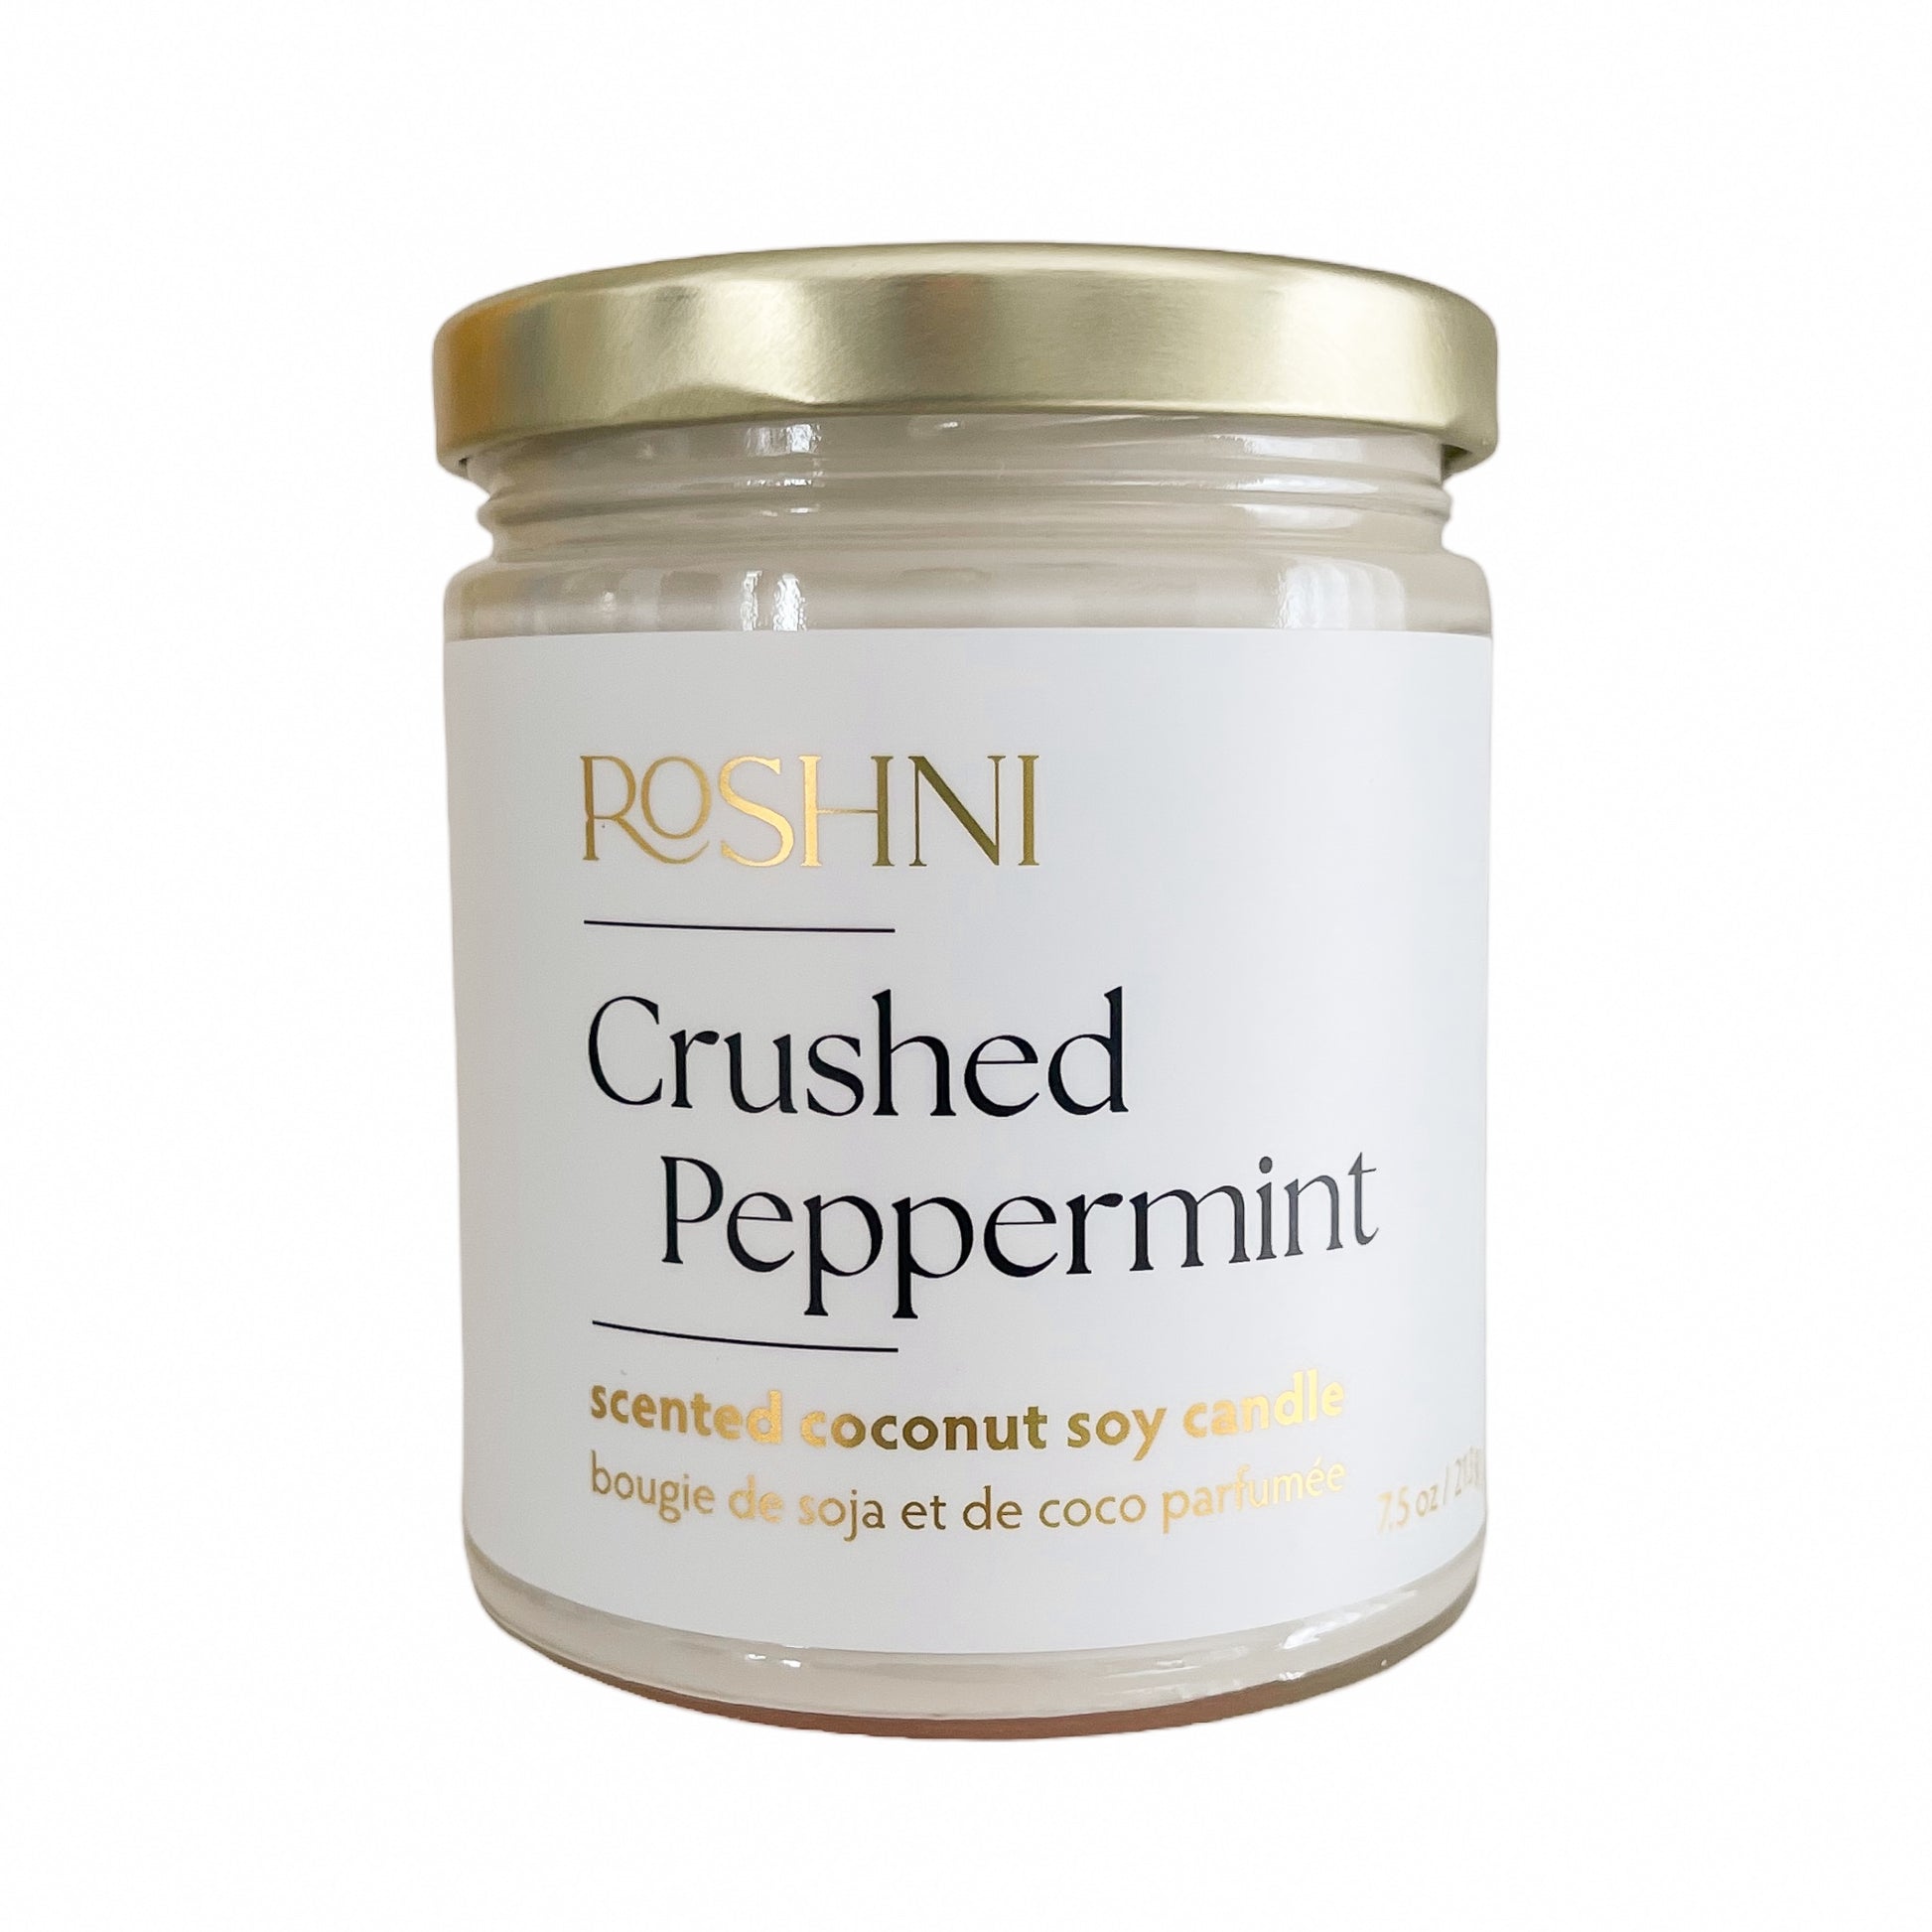 Crushed Peppermint Candle